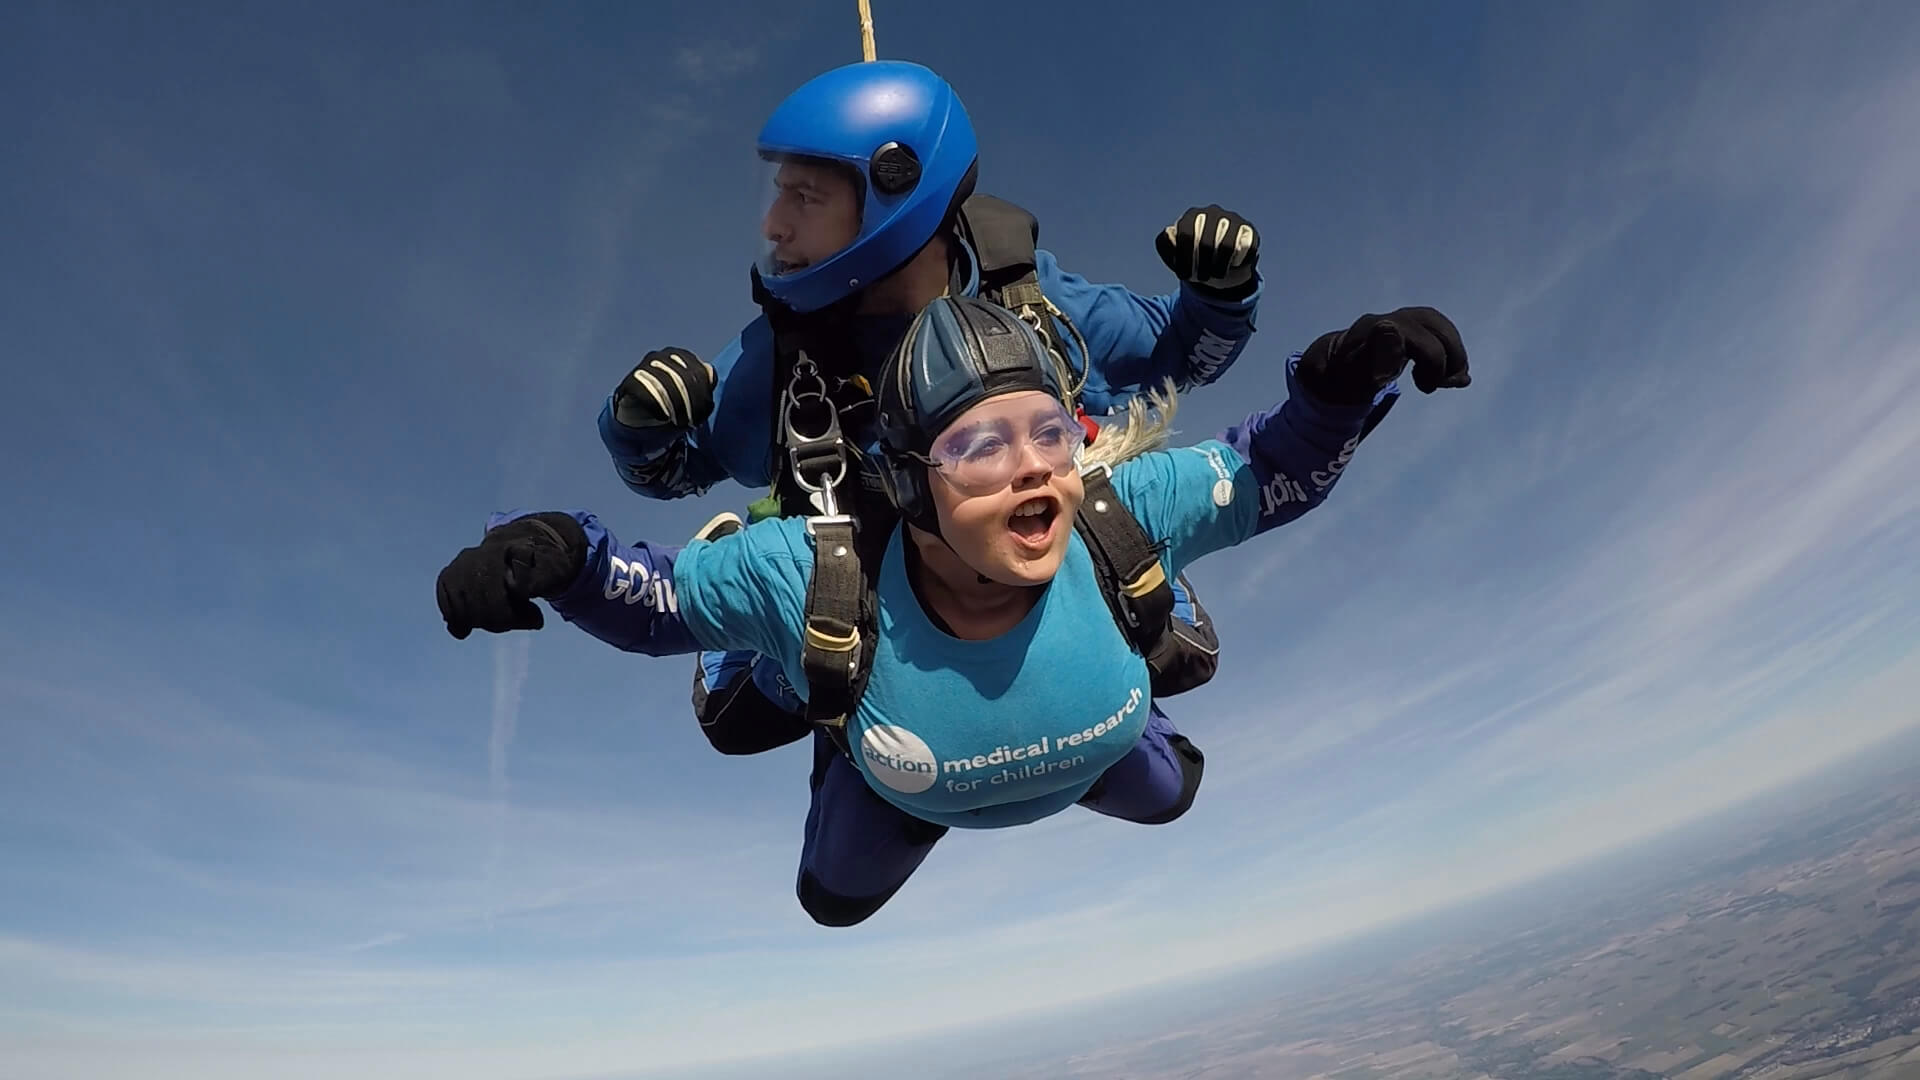 Action Fundraiser Skydiving